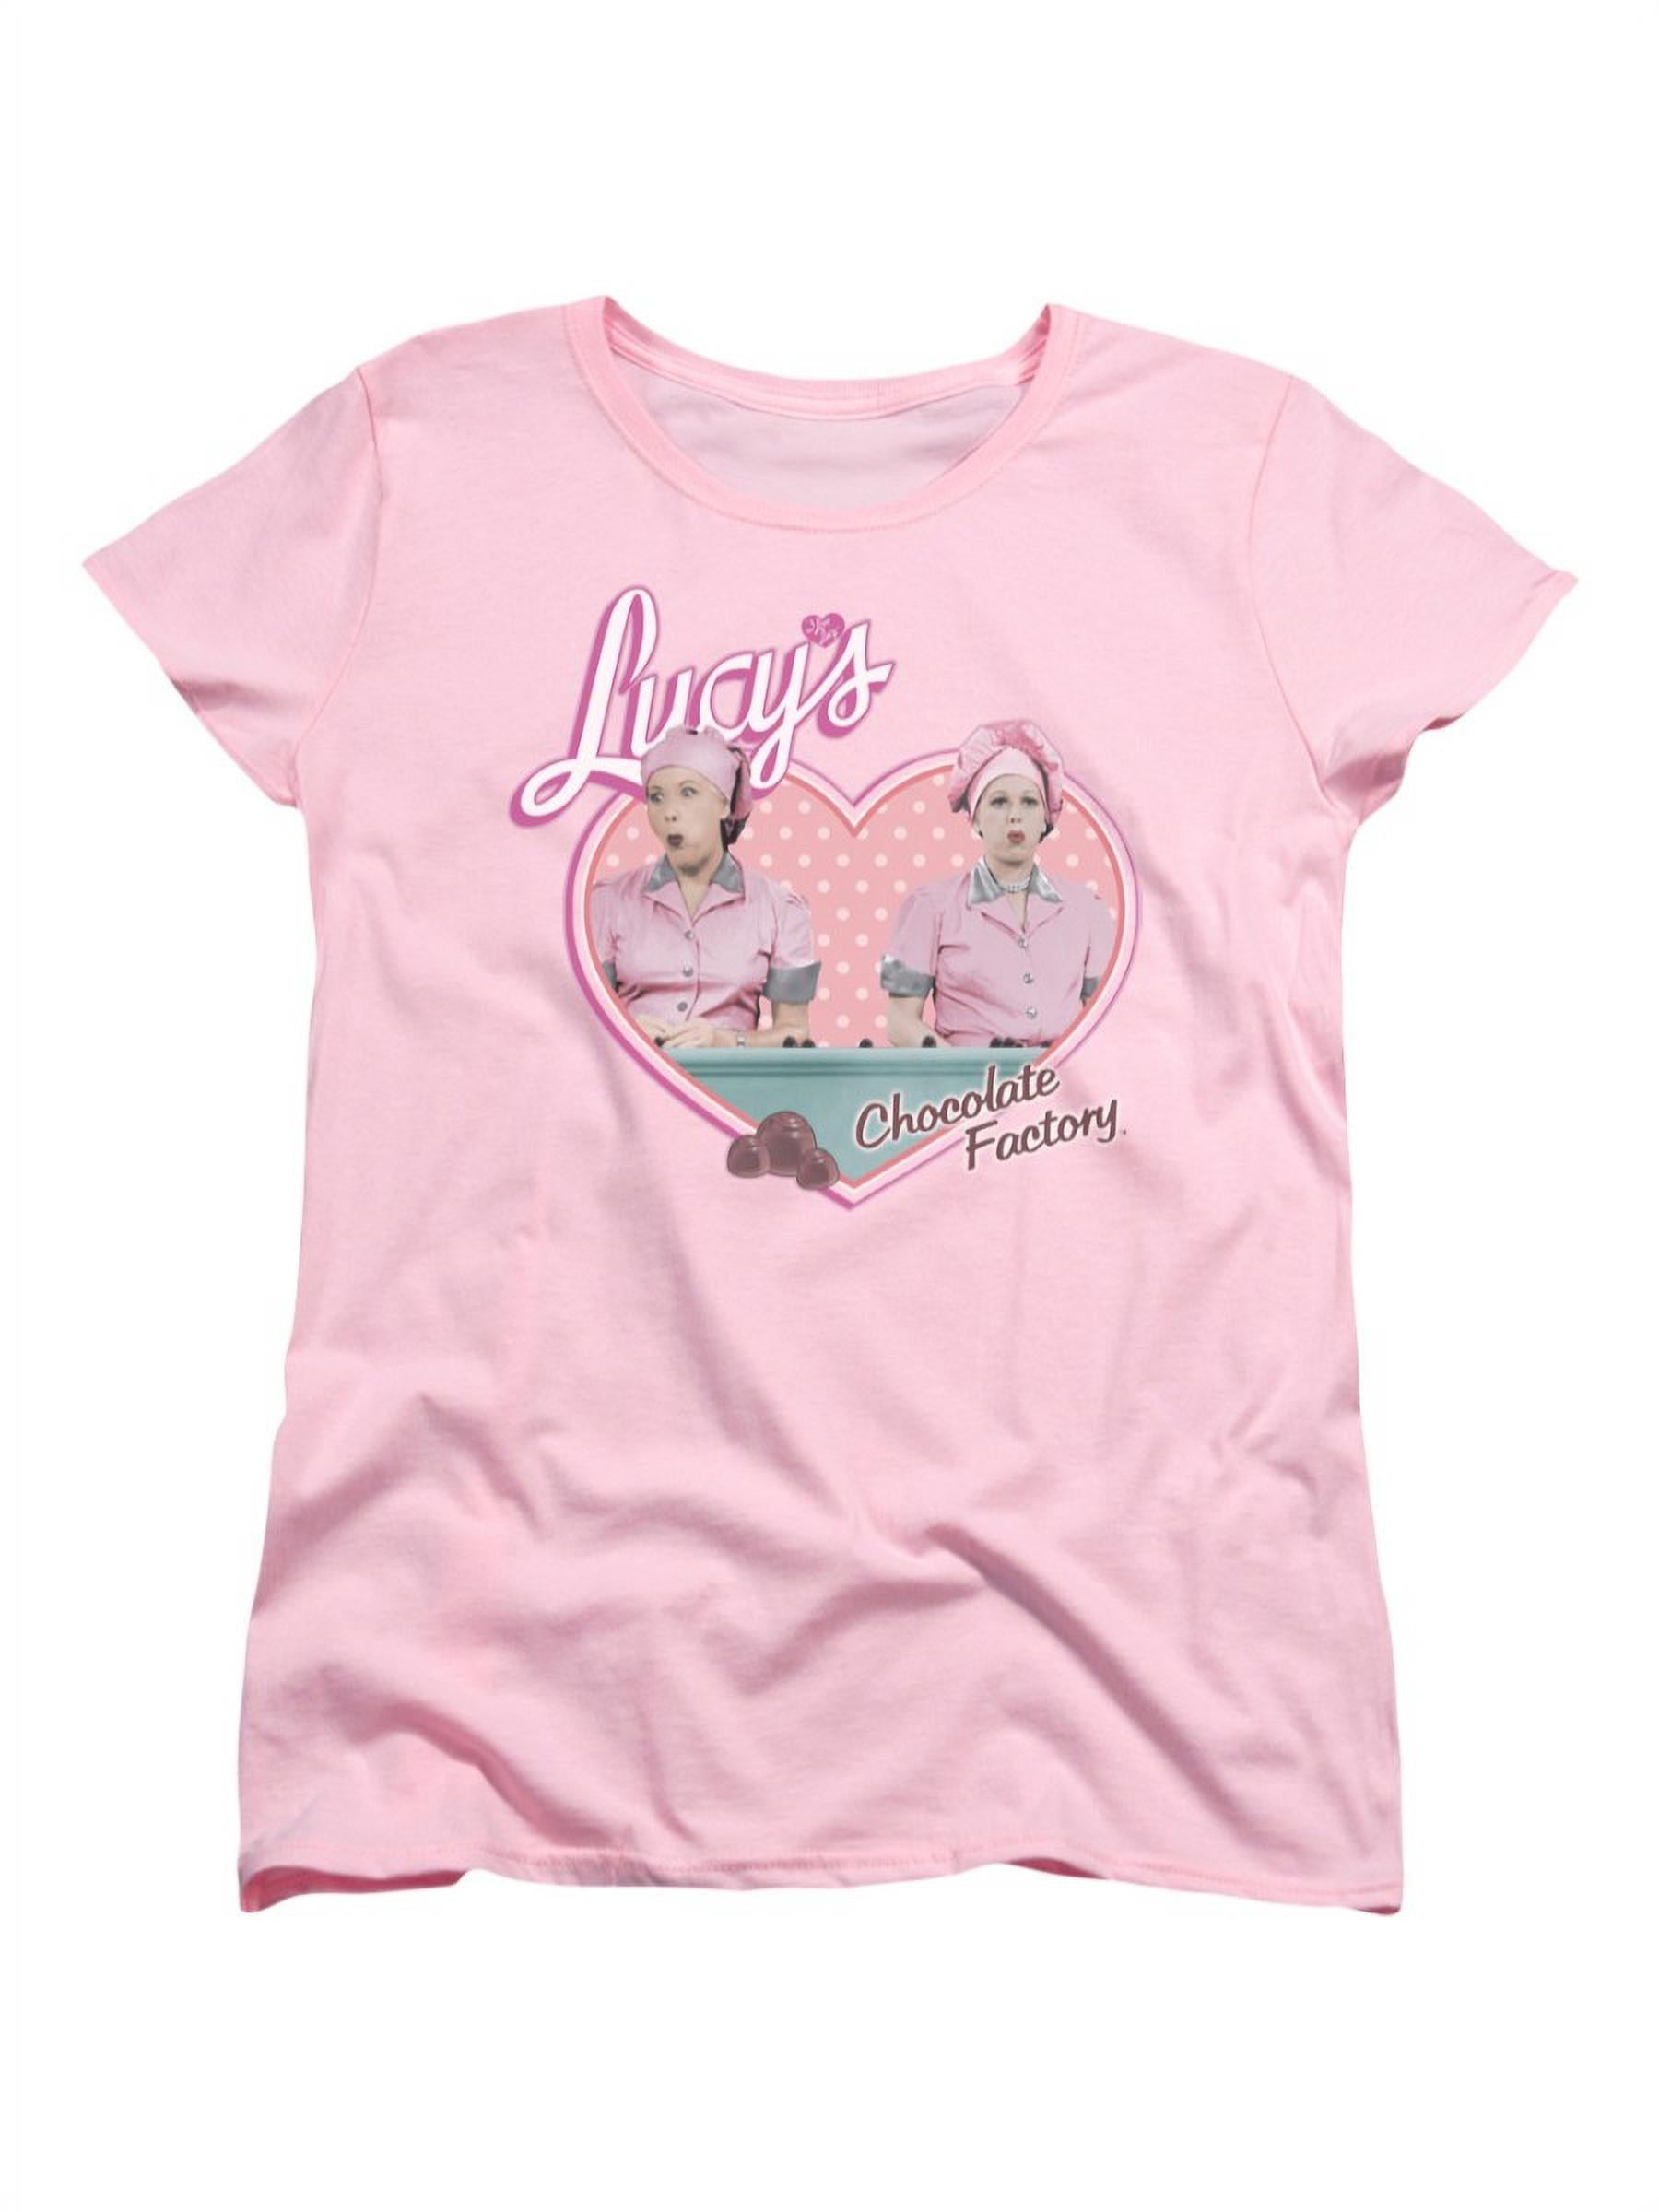 Authentic I Love Lucy TV Show Trading Card Baseball Ladies Women T-shirt top 